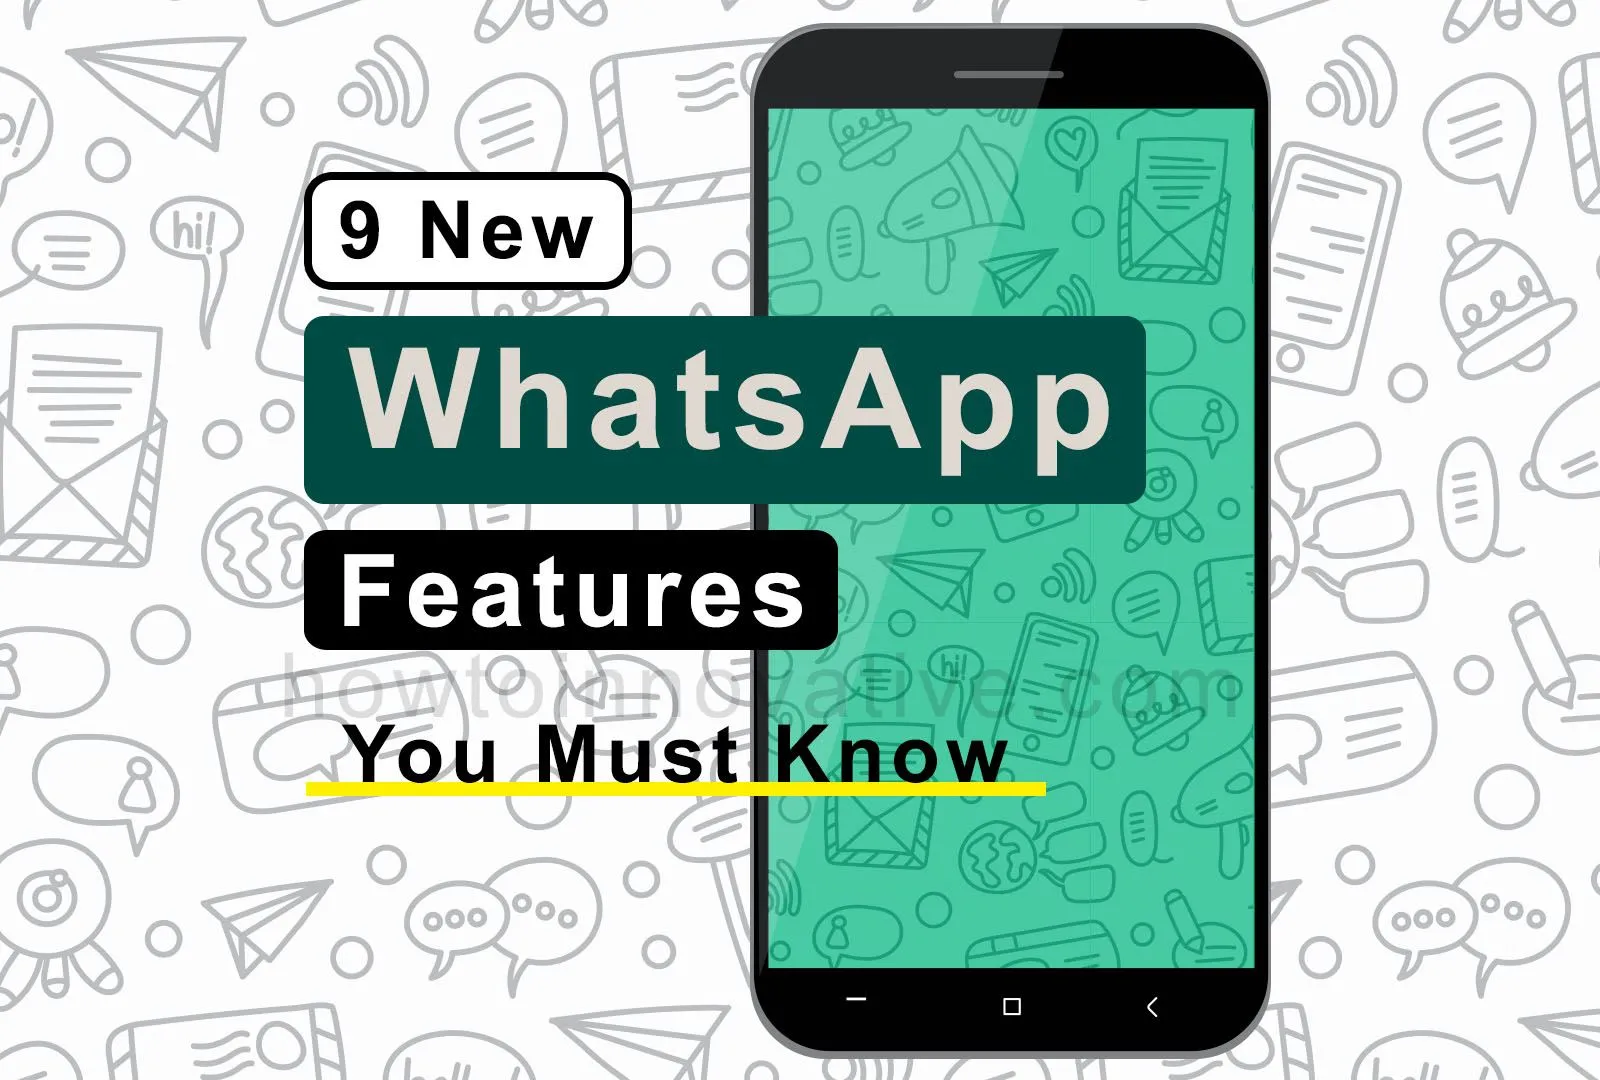 New WhatsApp Features You Must Know